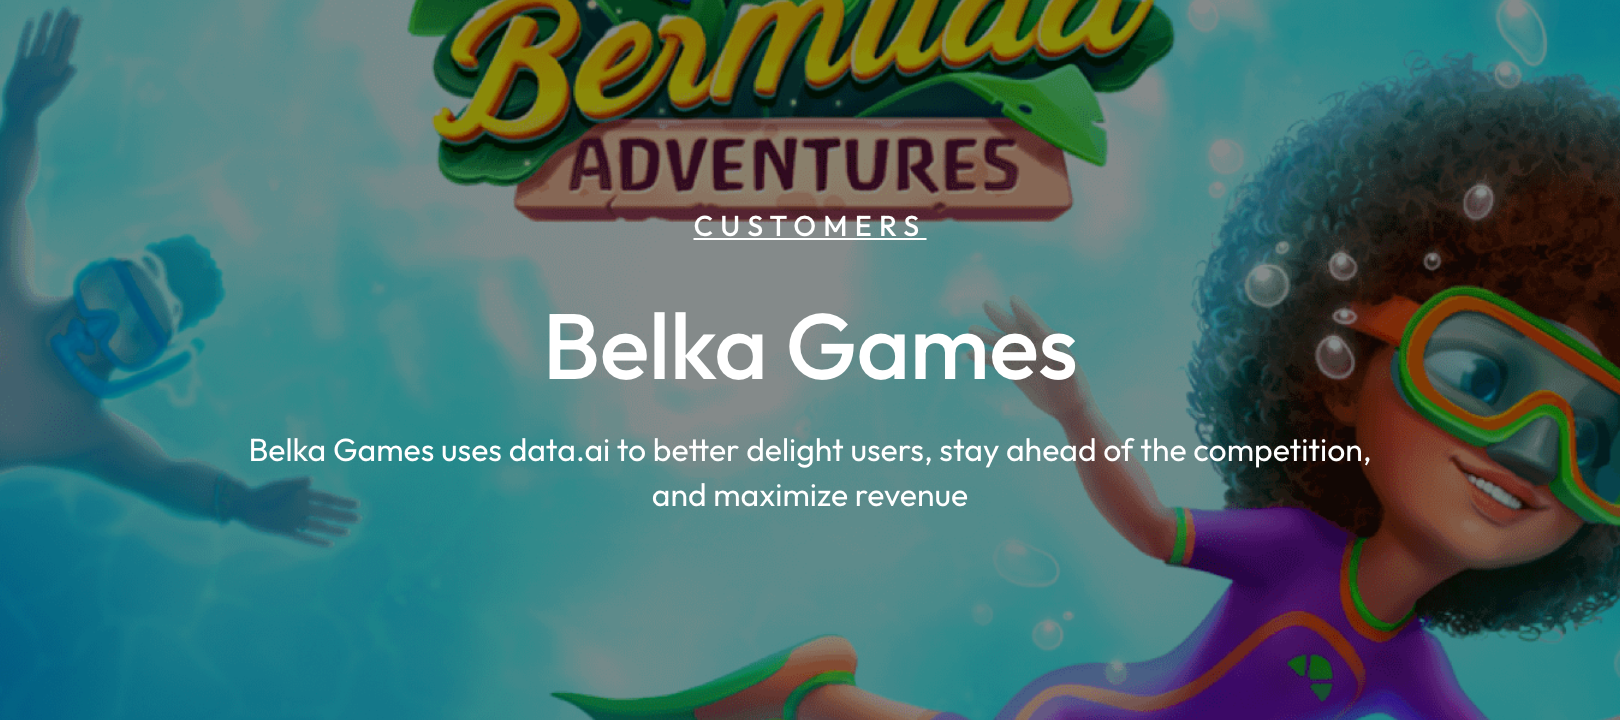 Belka Games: Delighting customers and maximizing revenue